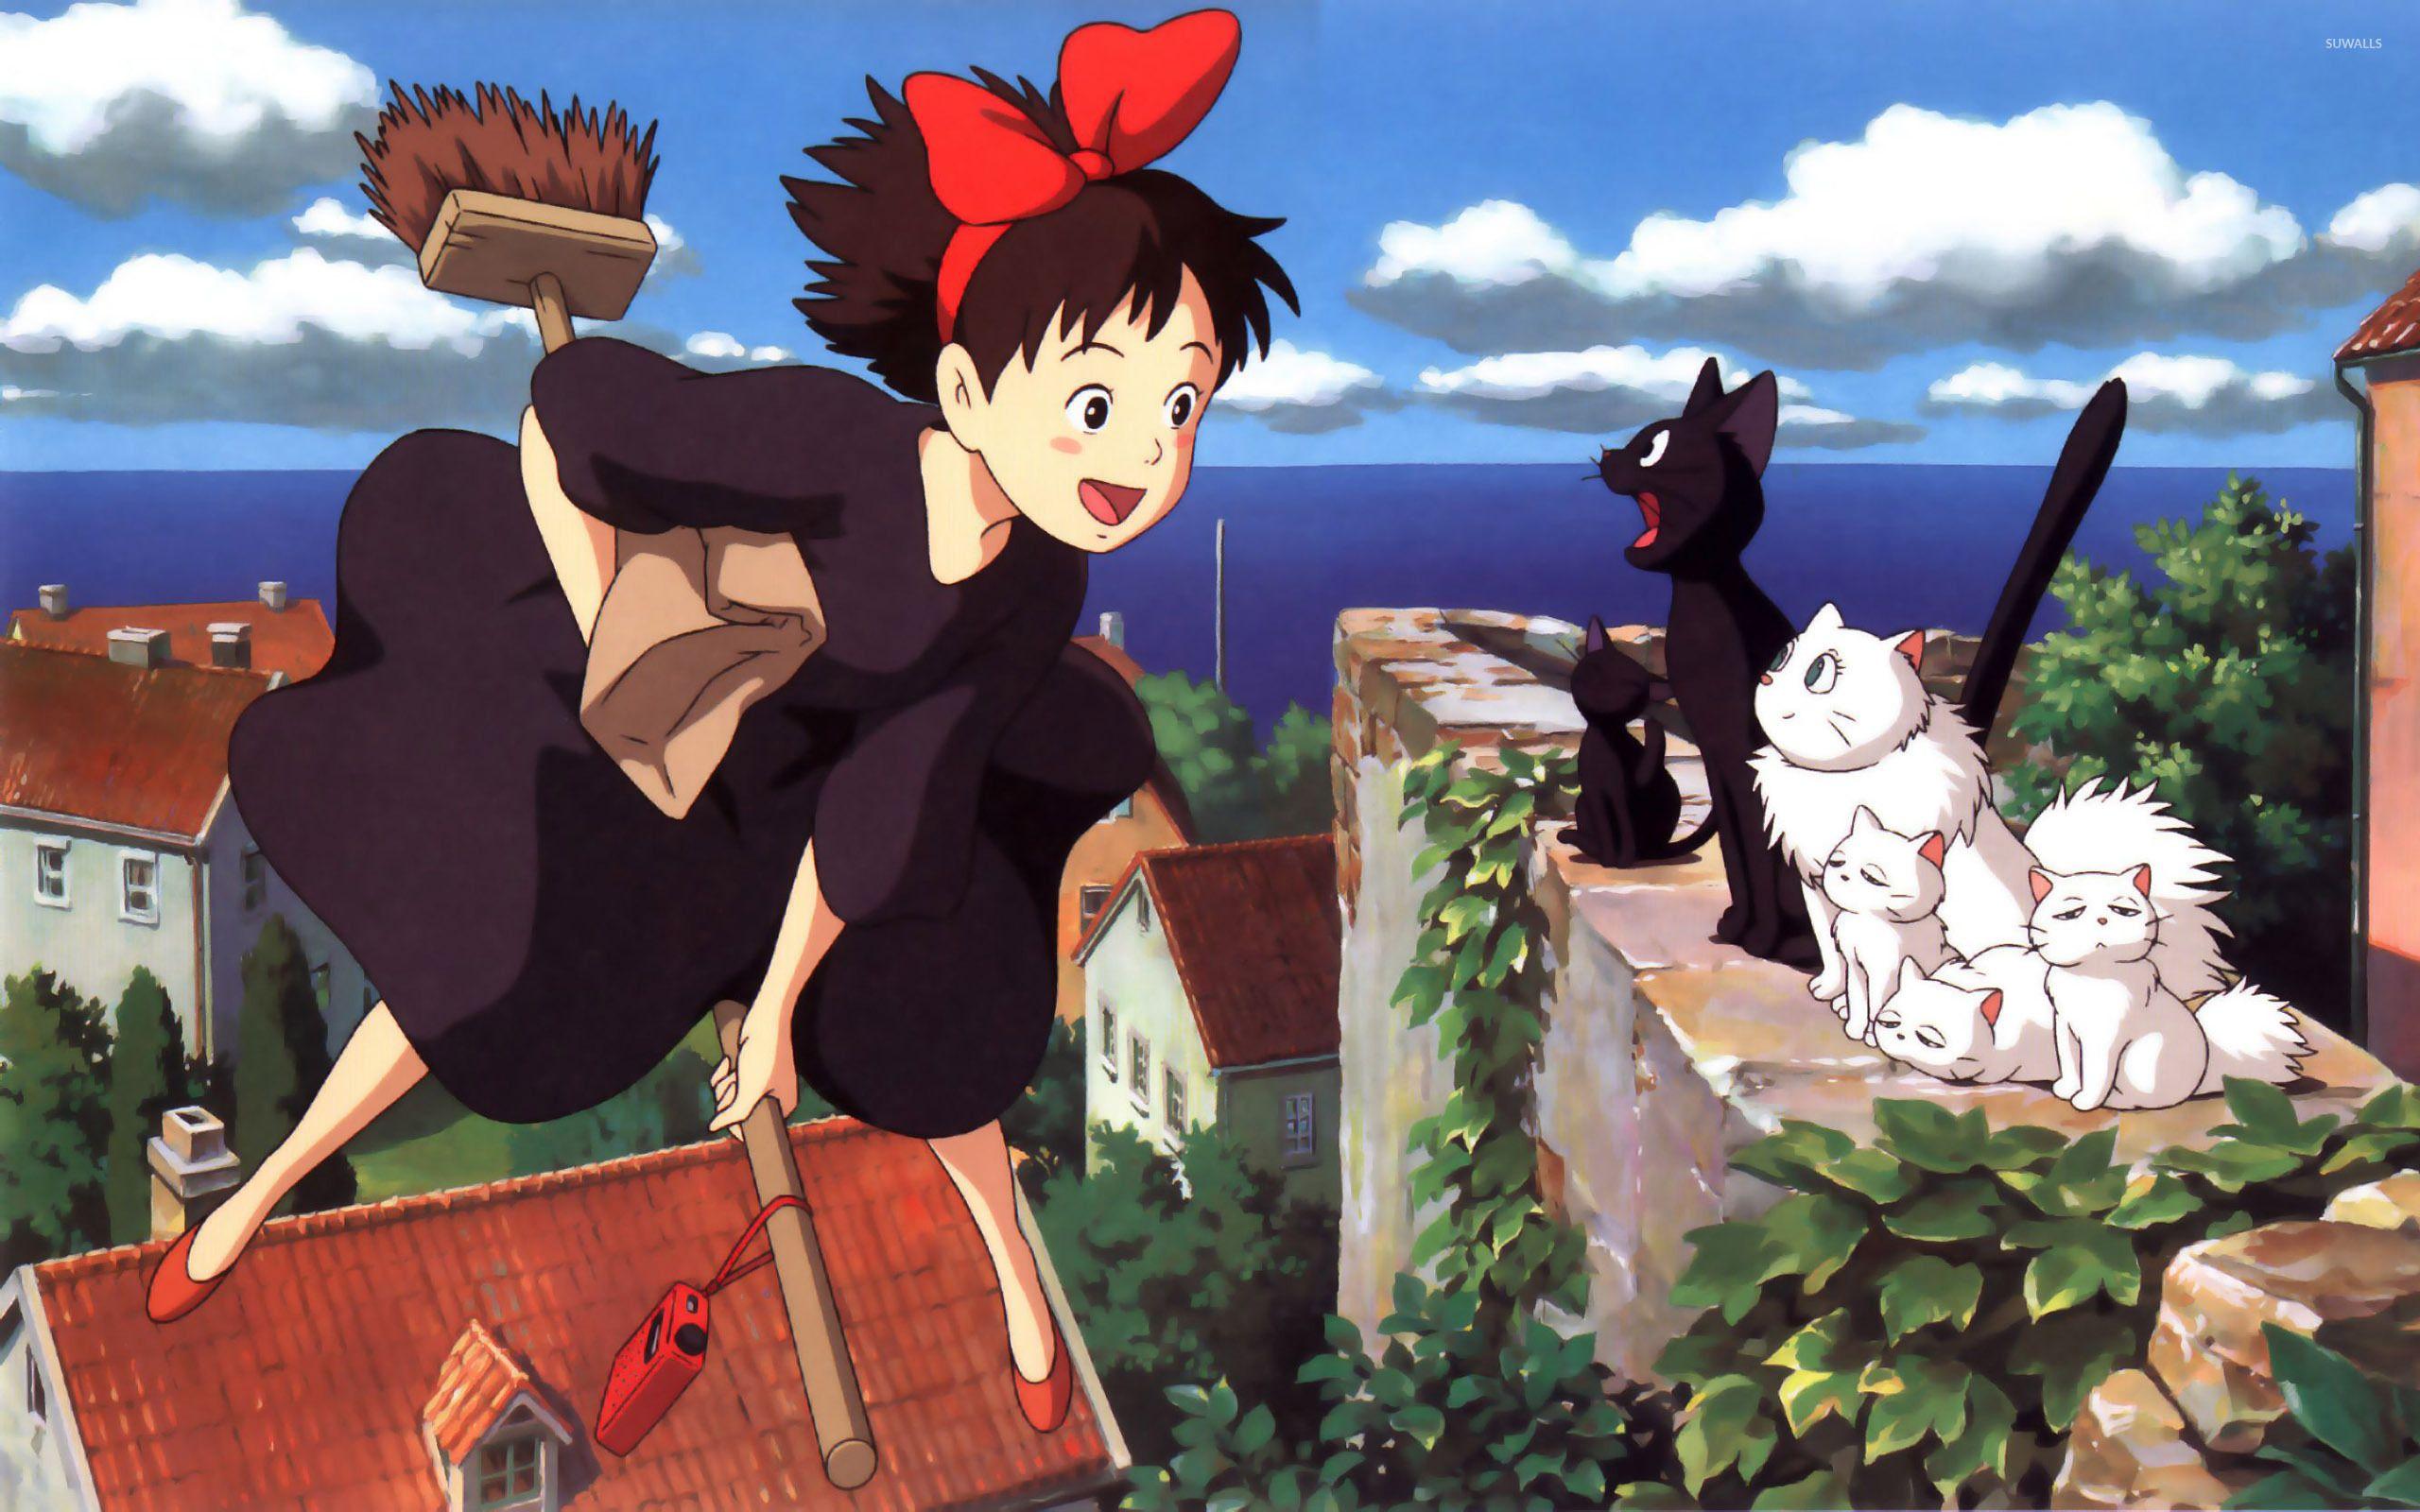 Kiki's Delivery Service Wallpapers - Top Free Kiki's Delivery Service